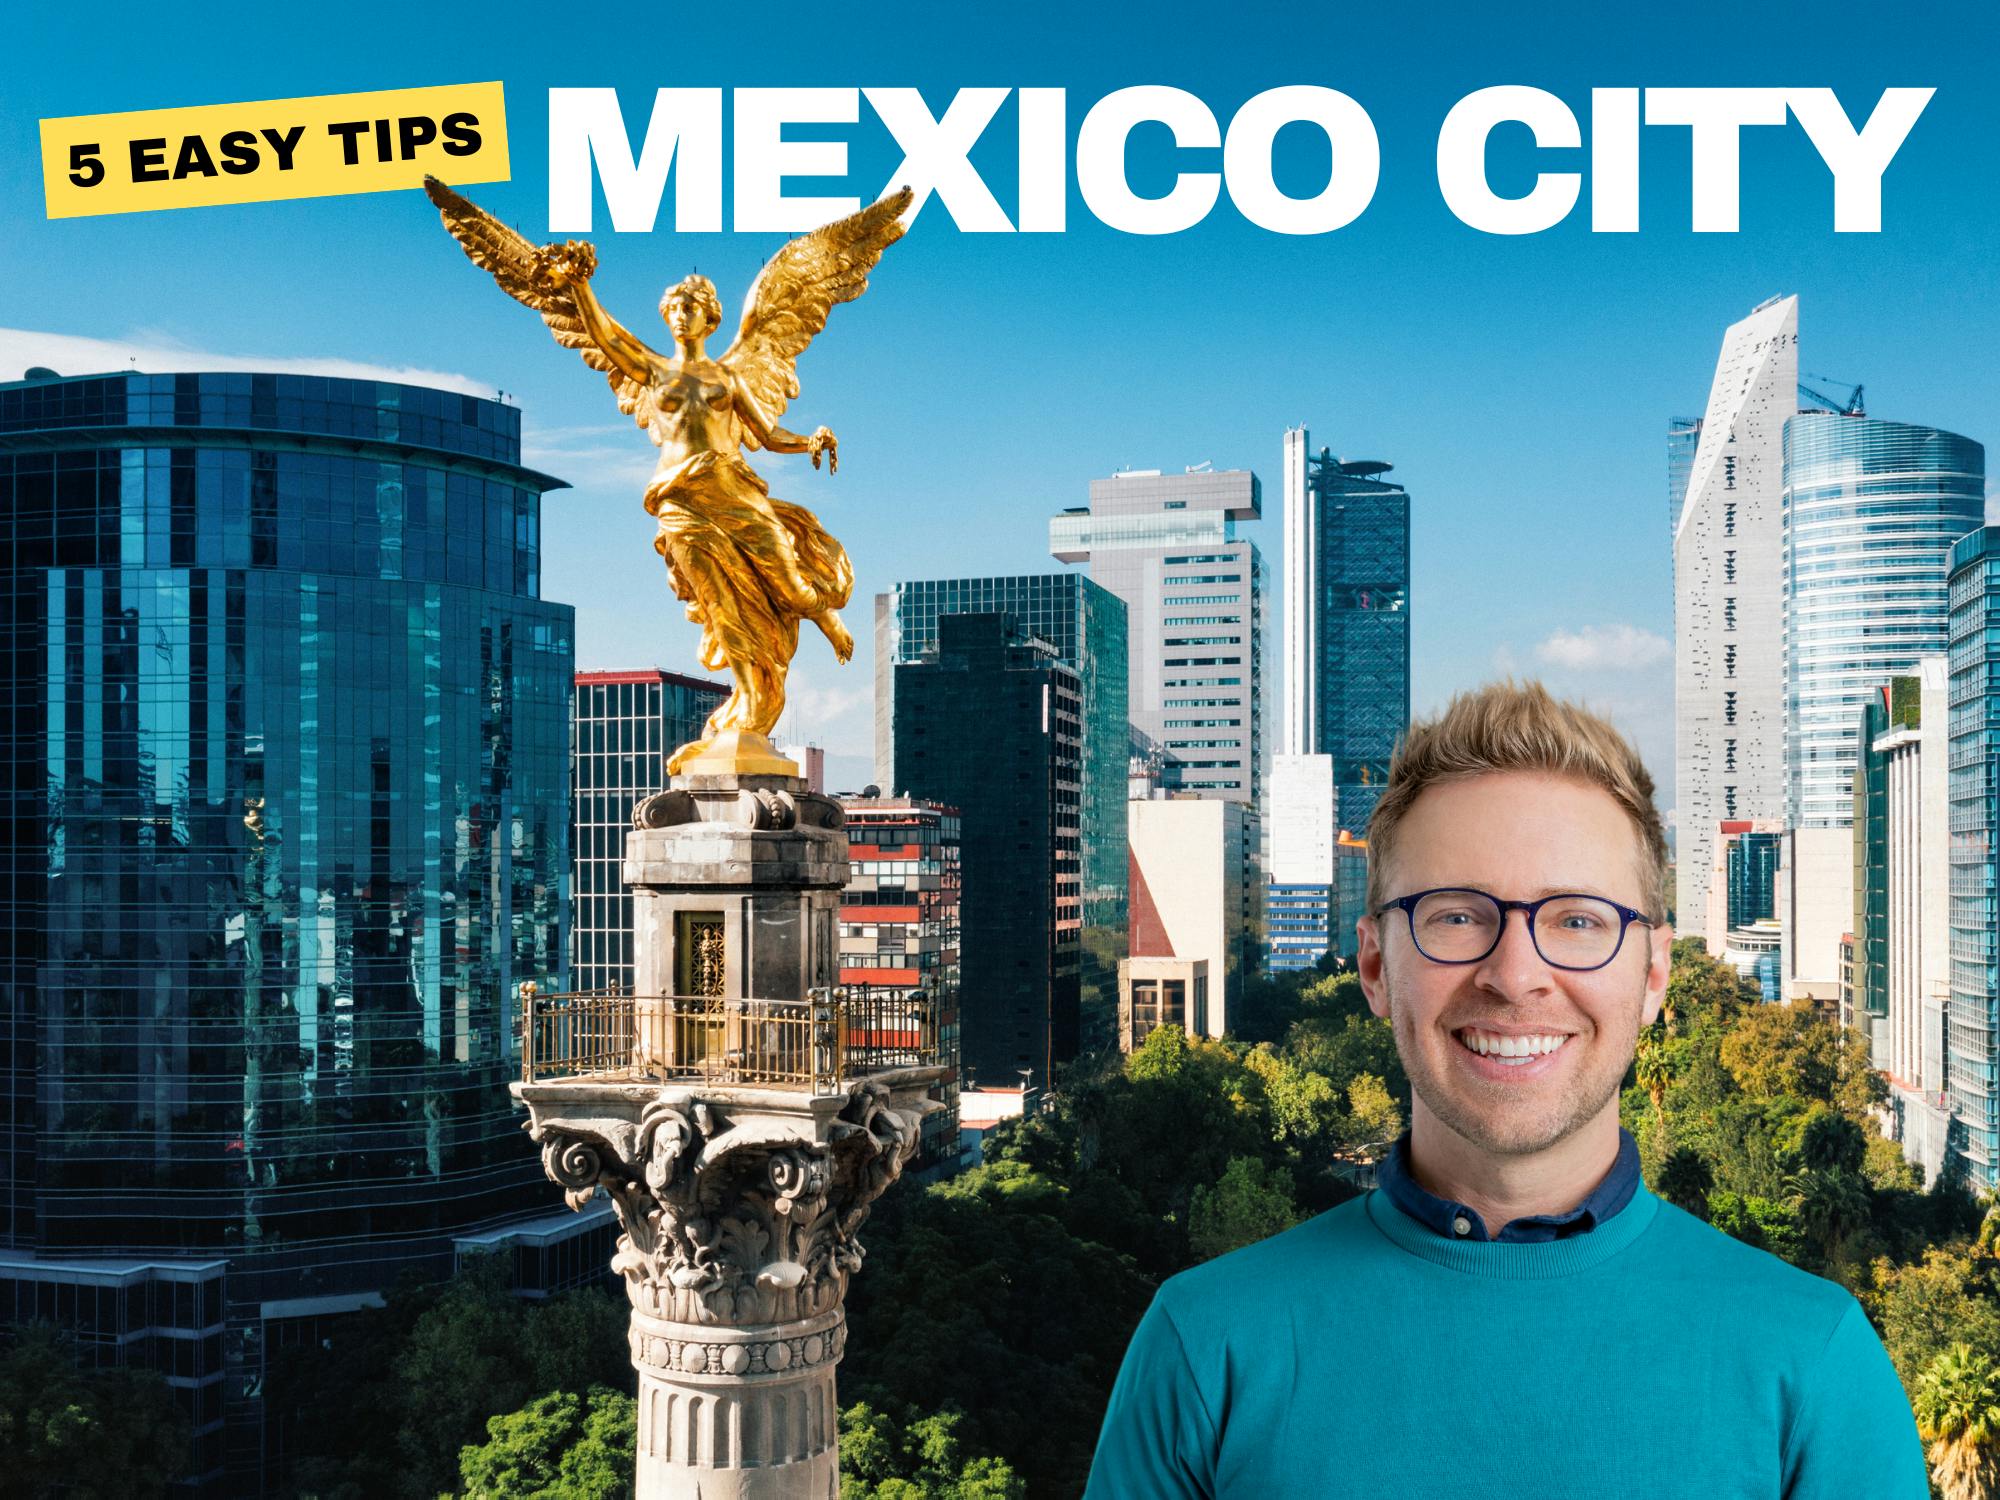 Header text: 5 Easy tips for Mexico City